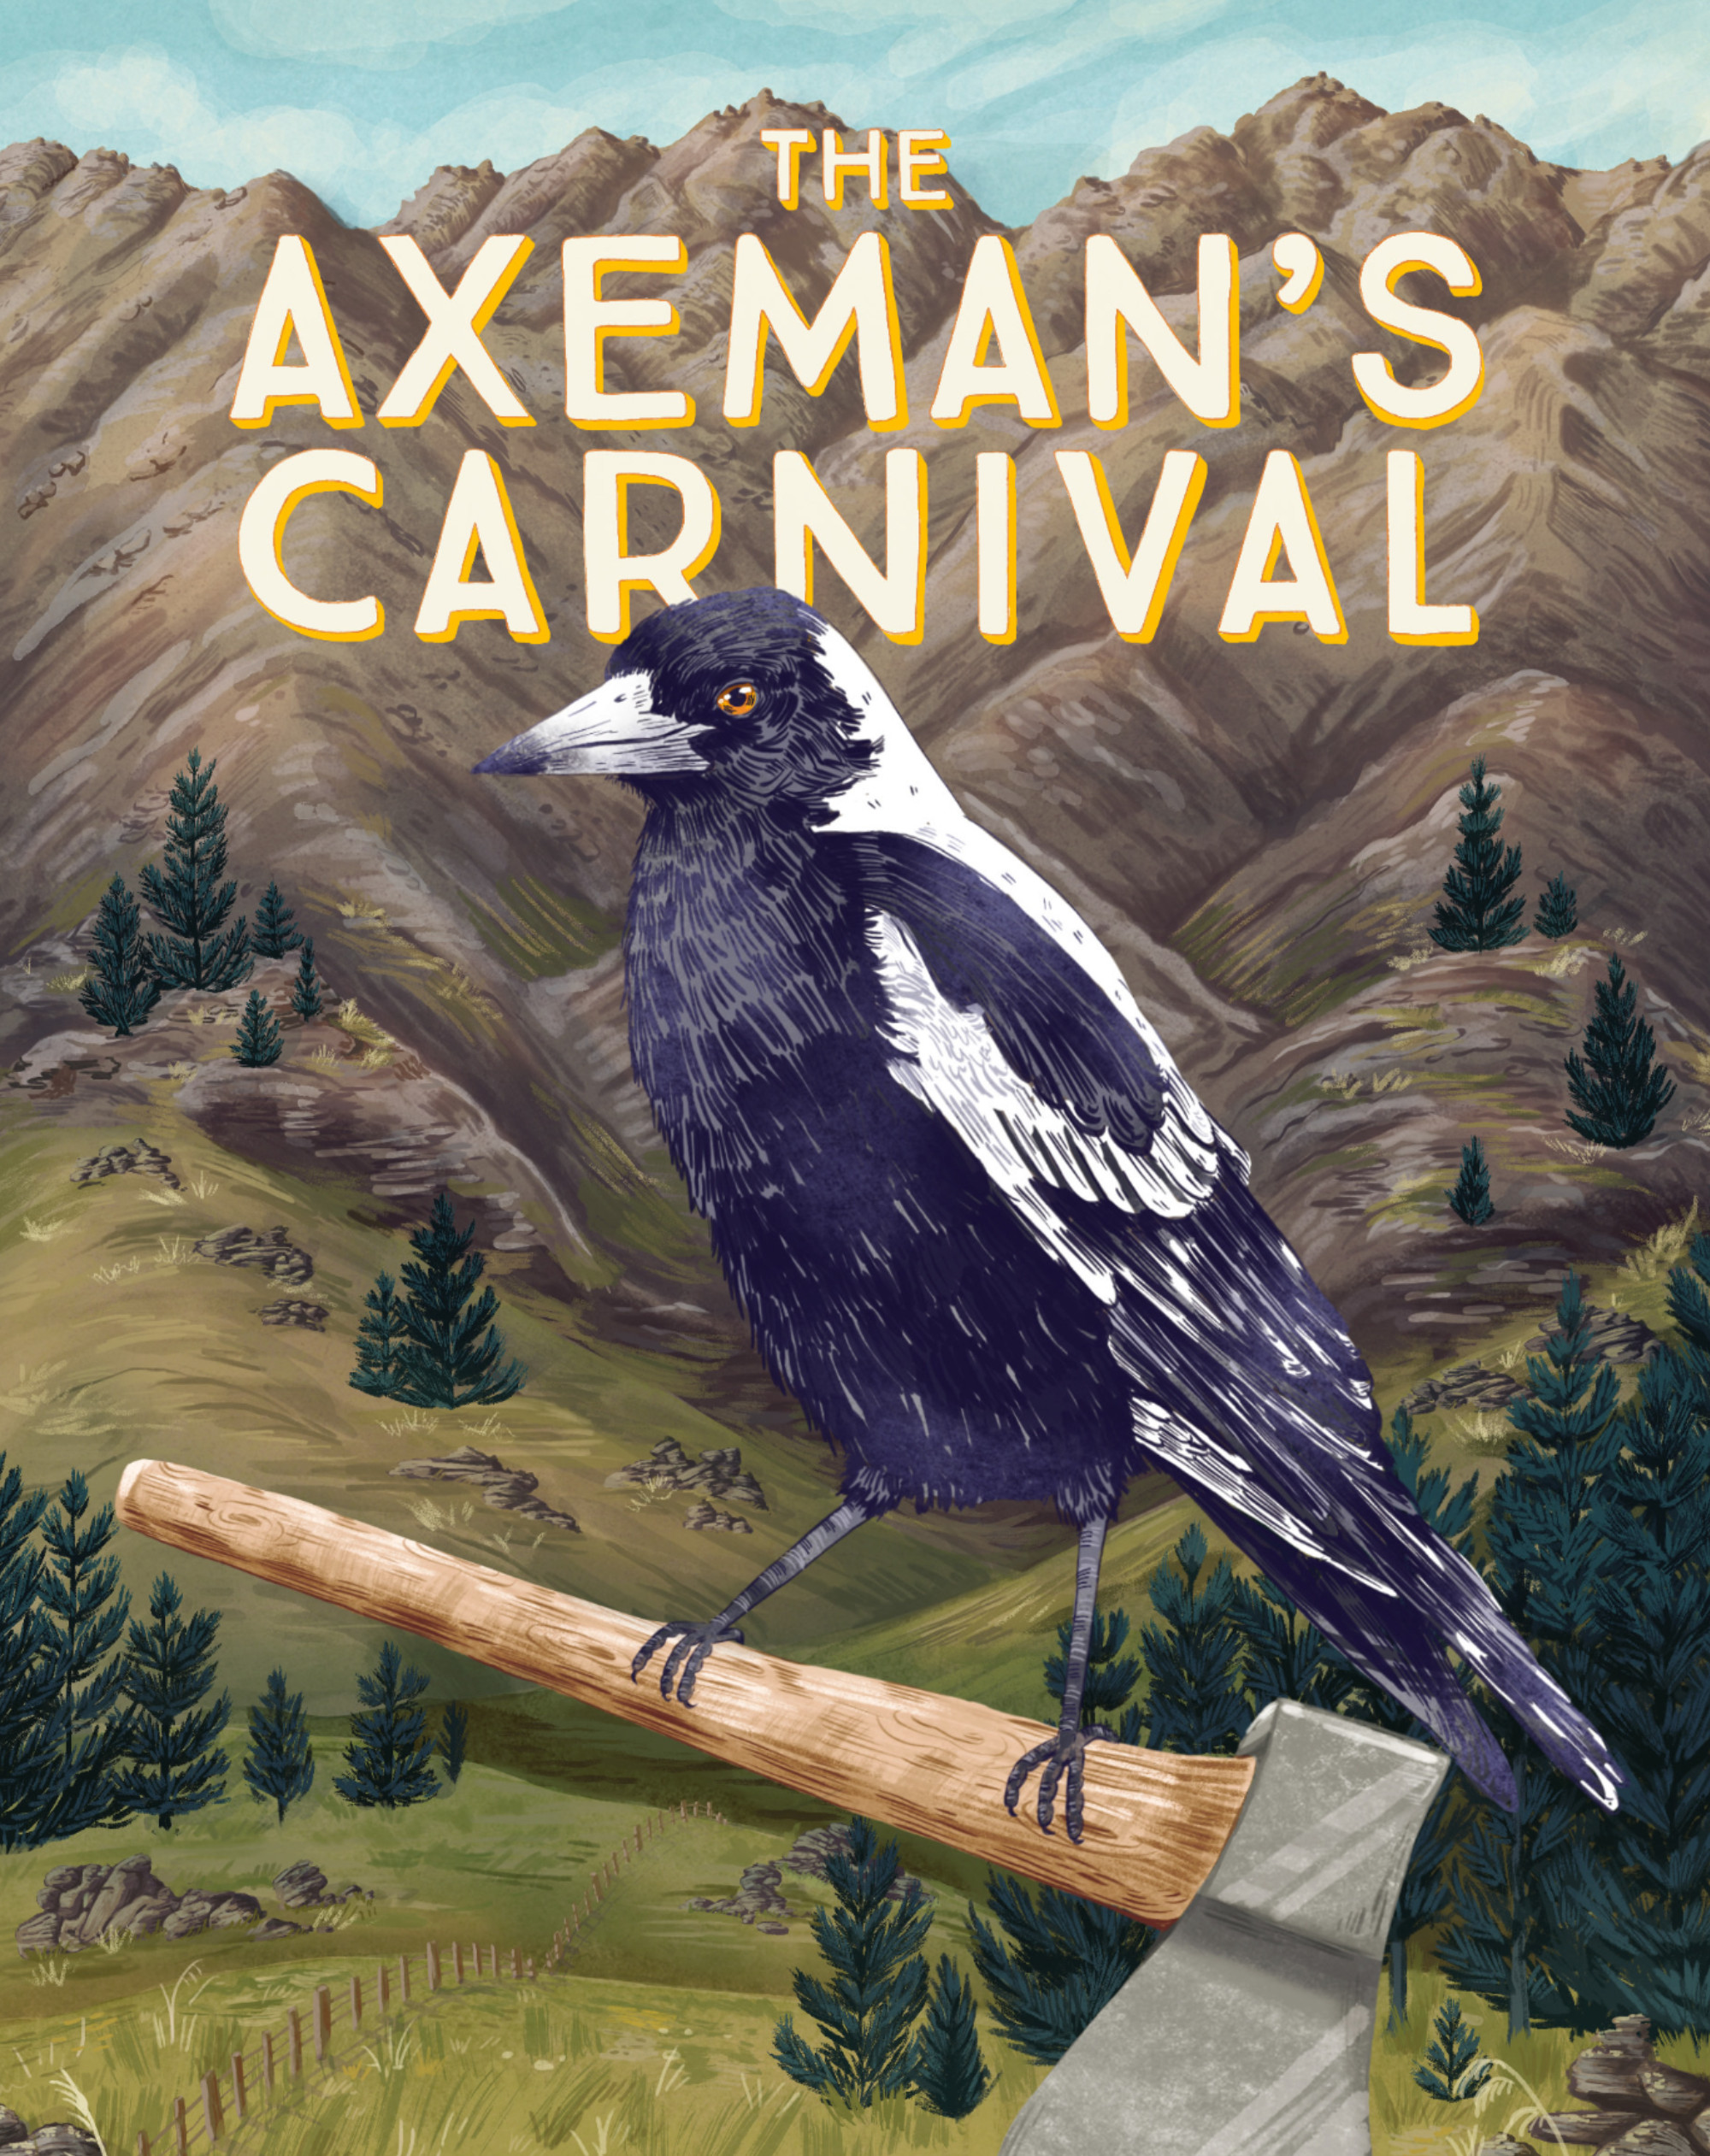 The cover of The Axeman's Carnival by Catherine Chidgey, a painting depicting a magpie perched on an axe embedded in a tree stump.